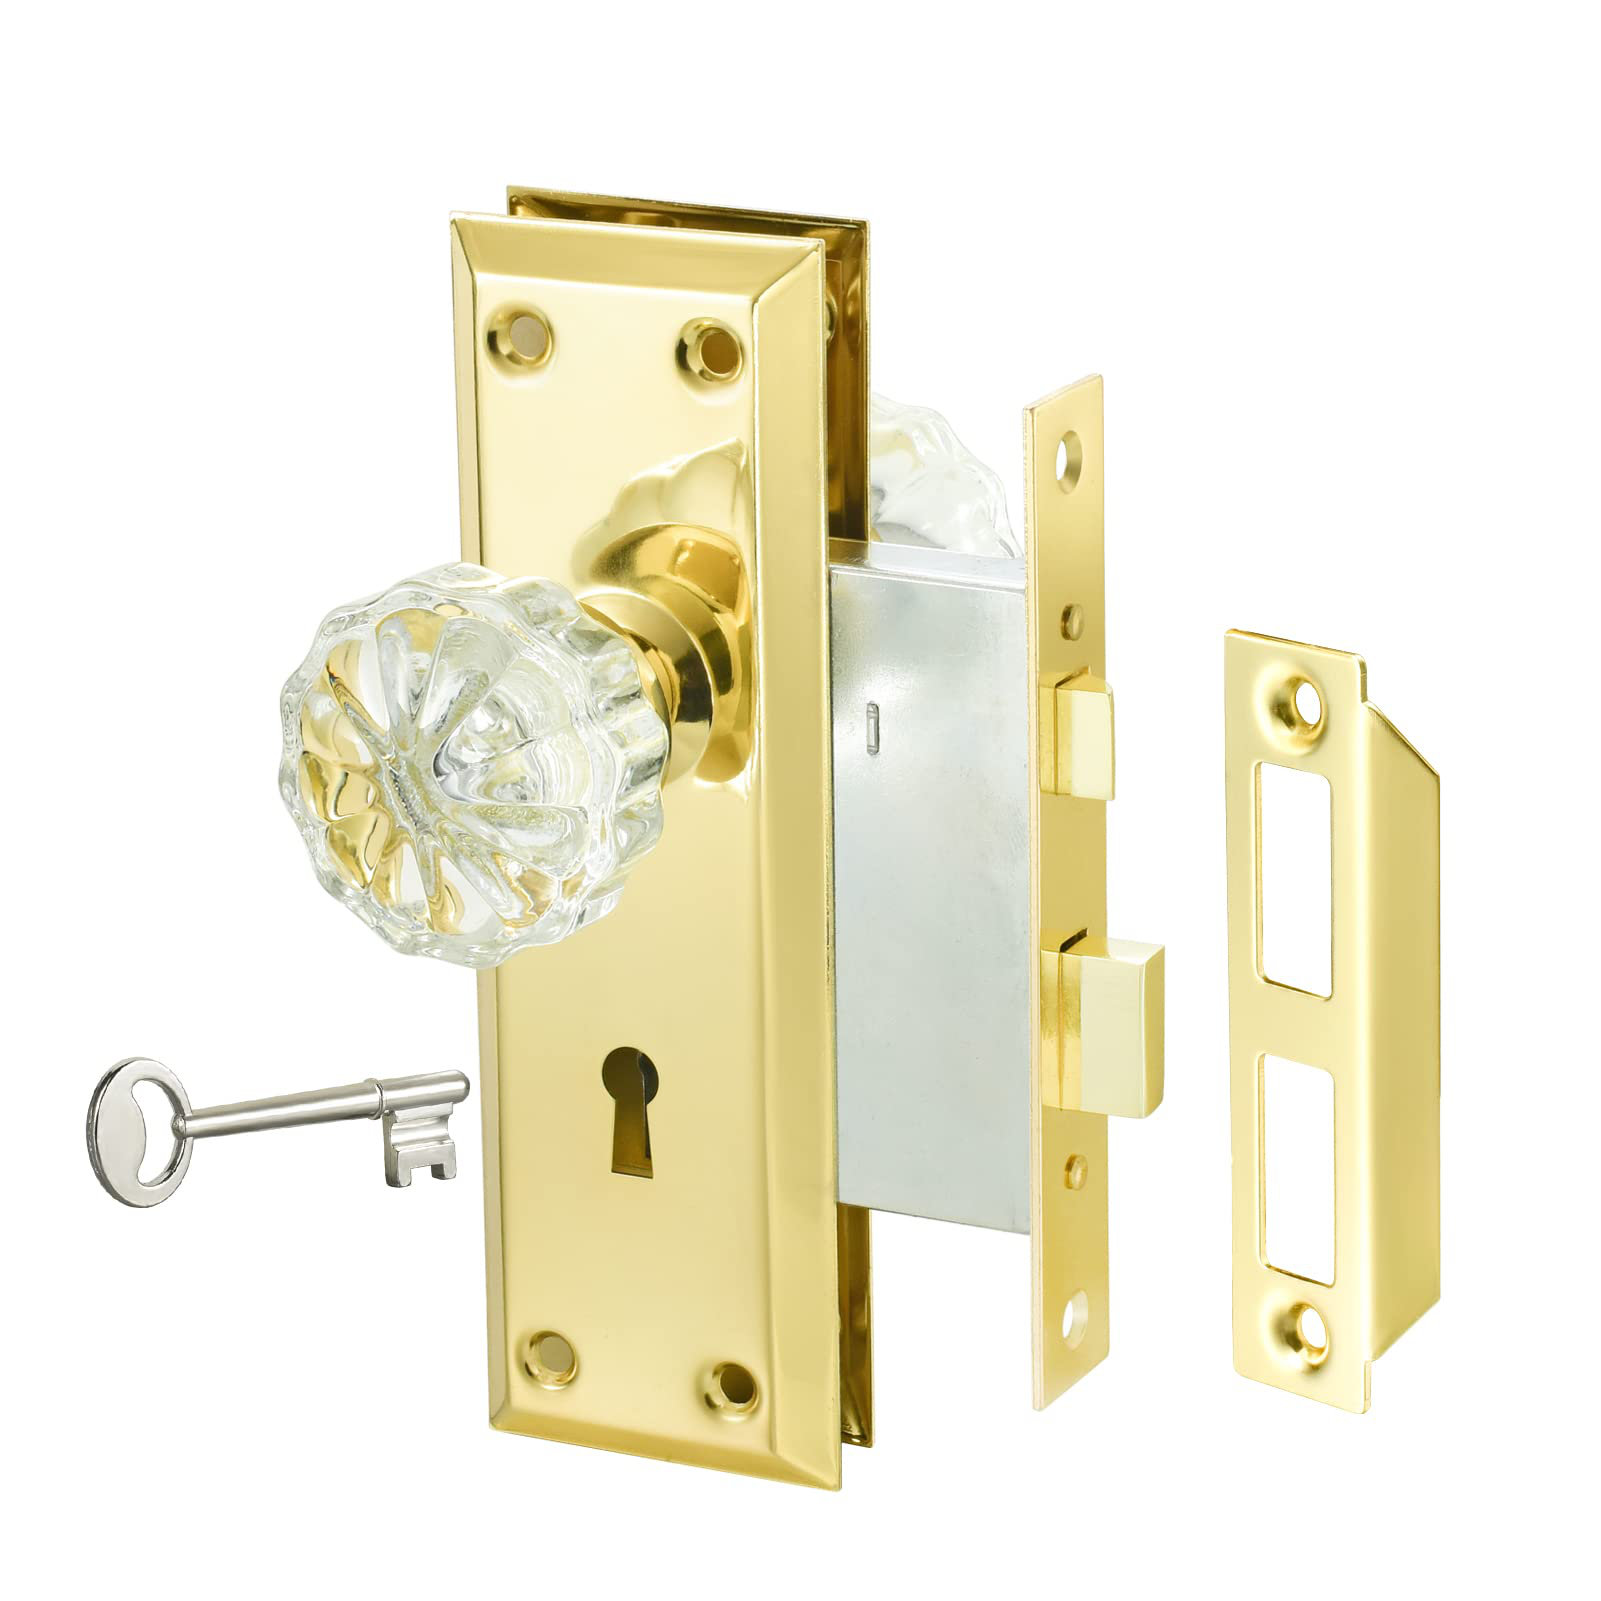 Cabinet Lock - Brass Finish Diamond-back Lock Fits Wooden Door/Drawer up to  1 Inch Thick